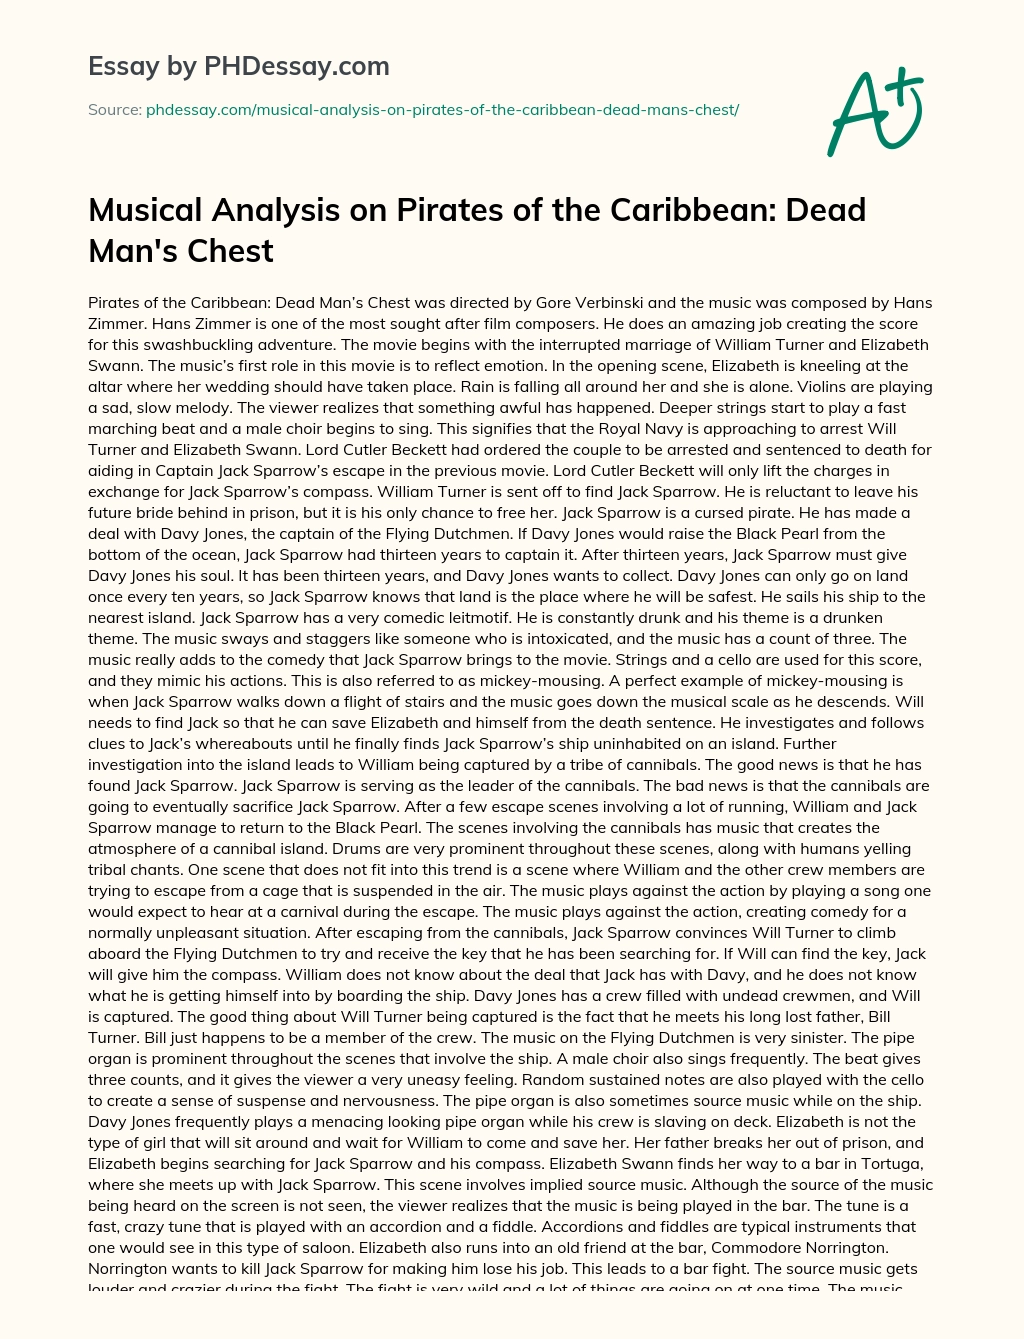 Musical Analysis on Pirates of the Caribbean: Dead Man’s Chest essay